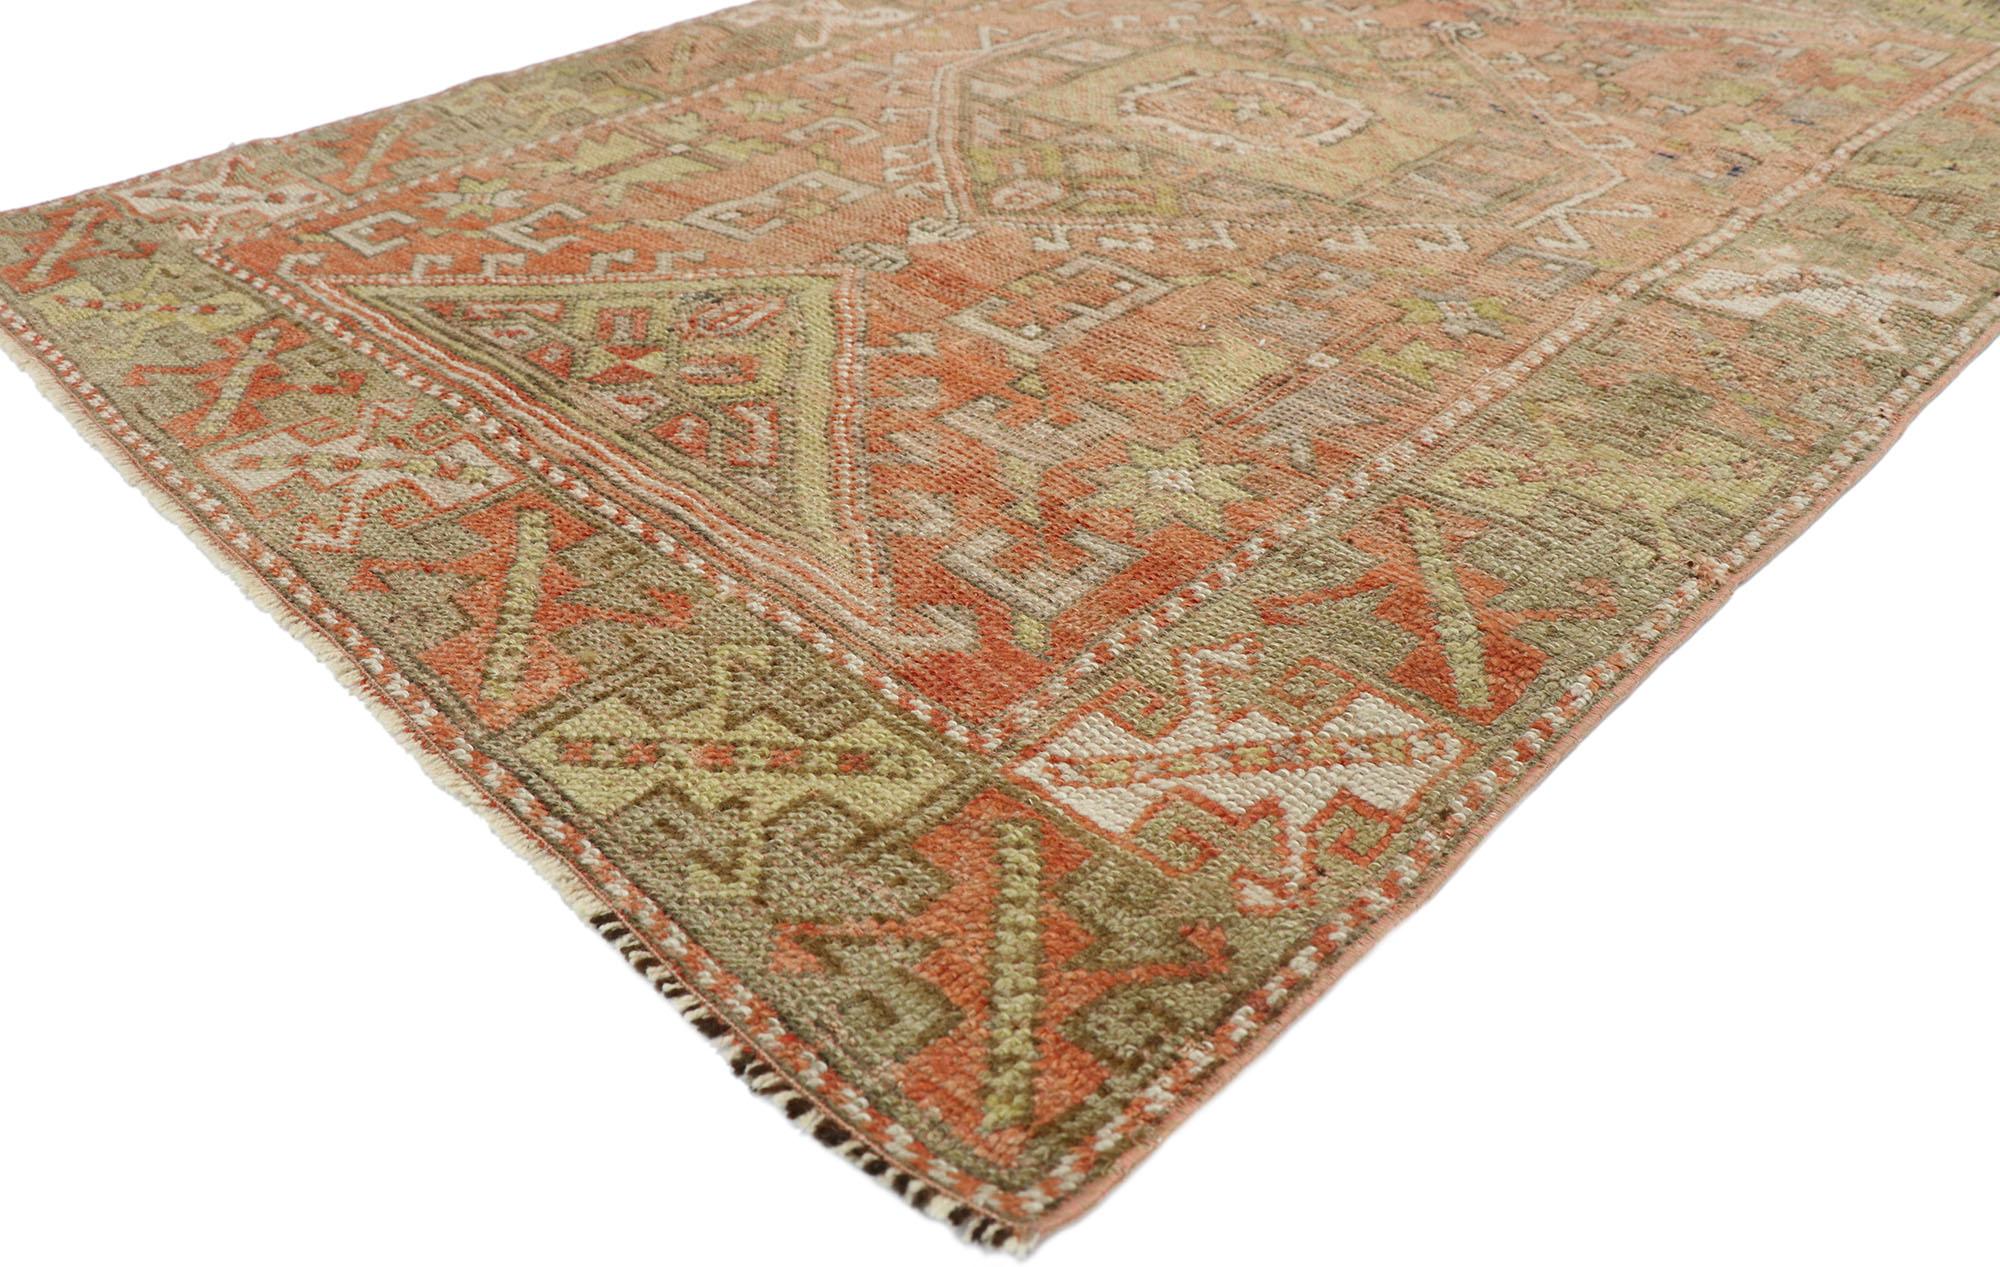 52762, vintage Turkish Oushak rug with rustic lodge and Tribal style 03'10 x 05'07. This hand knotted wool vintage Turkish Oushak rug features a central latch-hook medallion with ram's horn pendants at either end. Triangular ziggurat mounds along